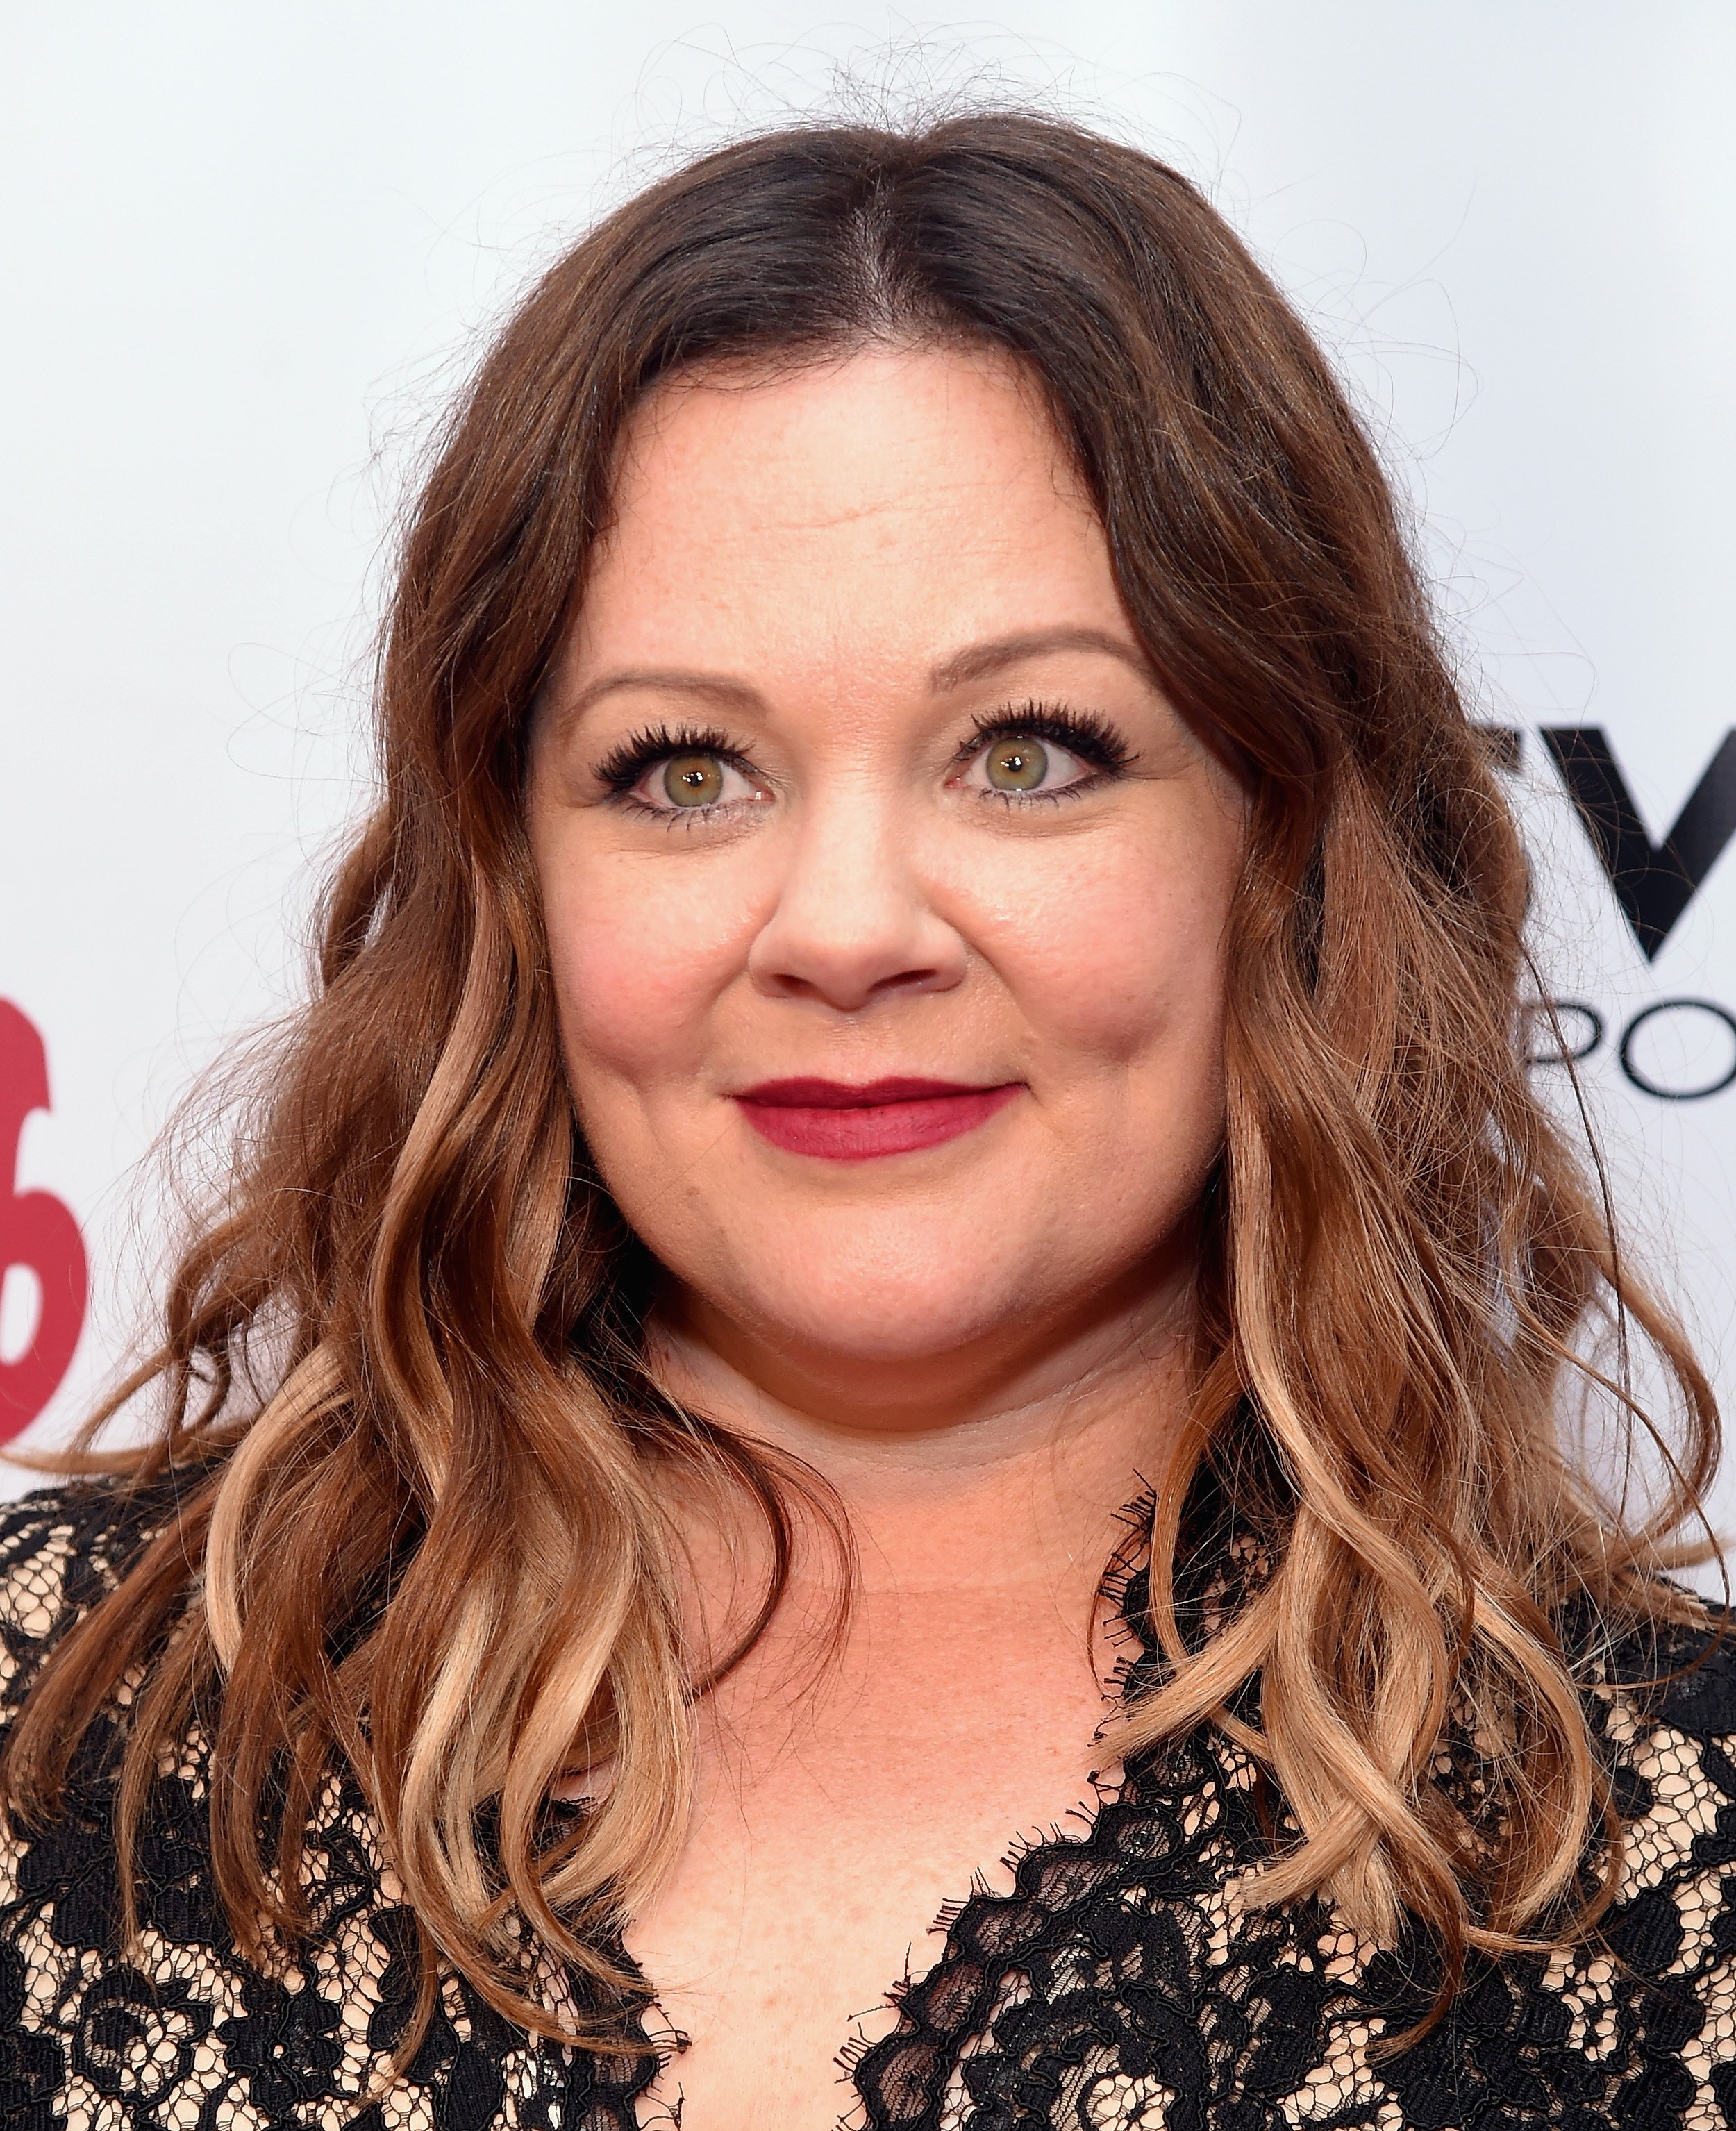 Melissa McCarthy pictured at the Gildafest '16 at Carolines On Broadway, 2016, New York City. | Photo: Getty Images